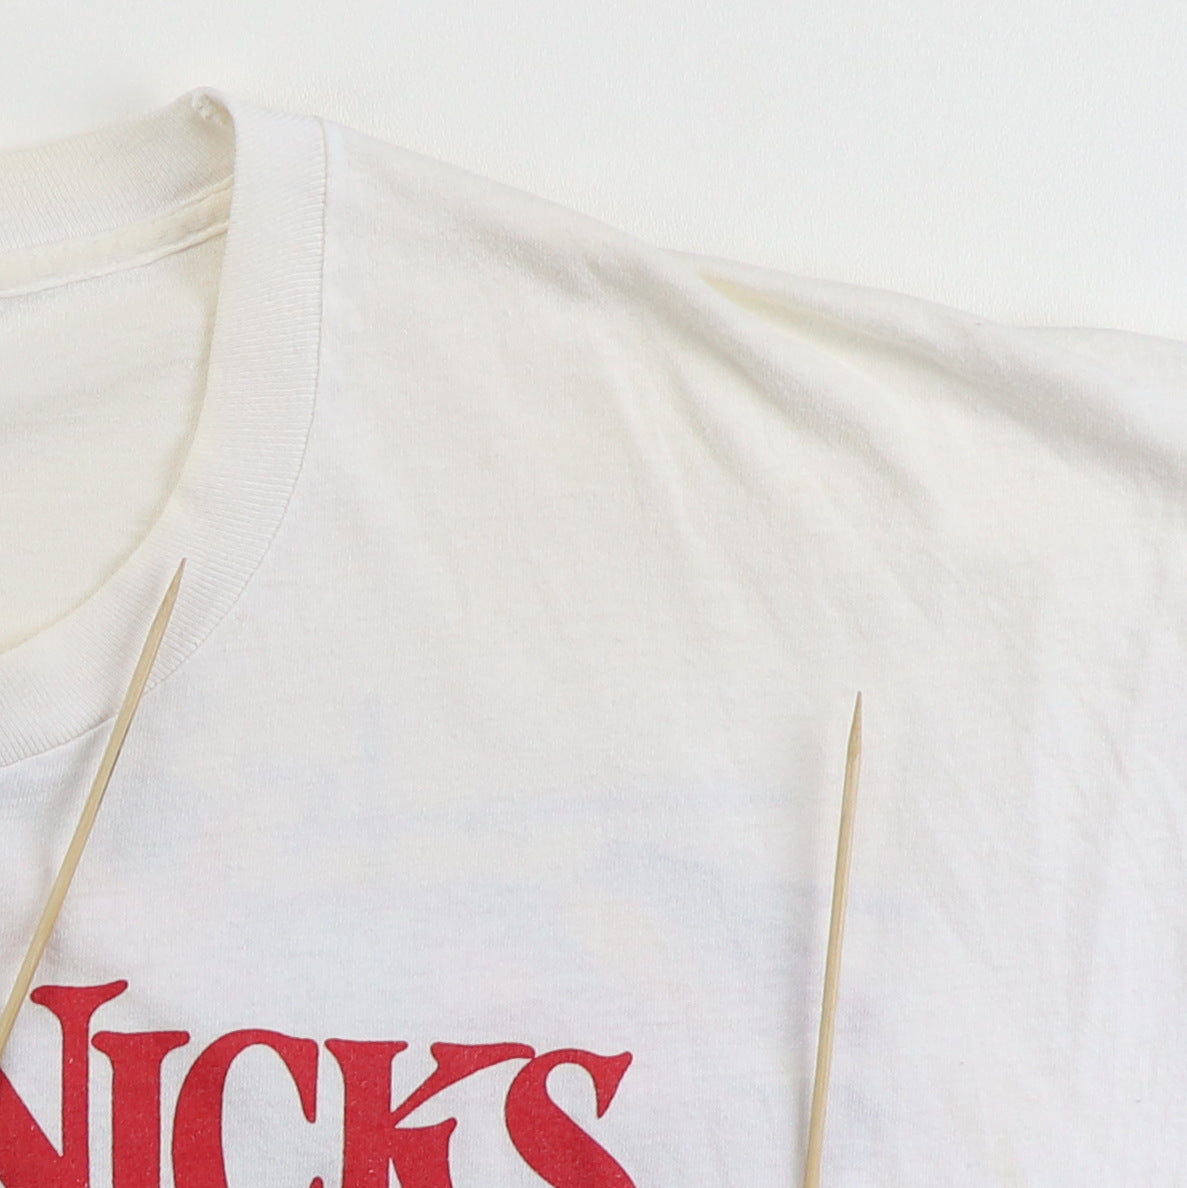 1989 Stevie Nicks The Other Side Of The Mirror Tour Shirt